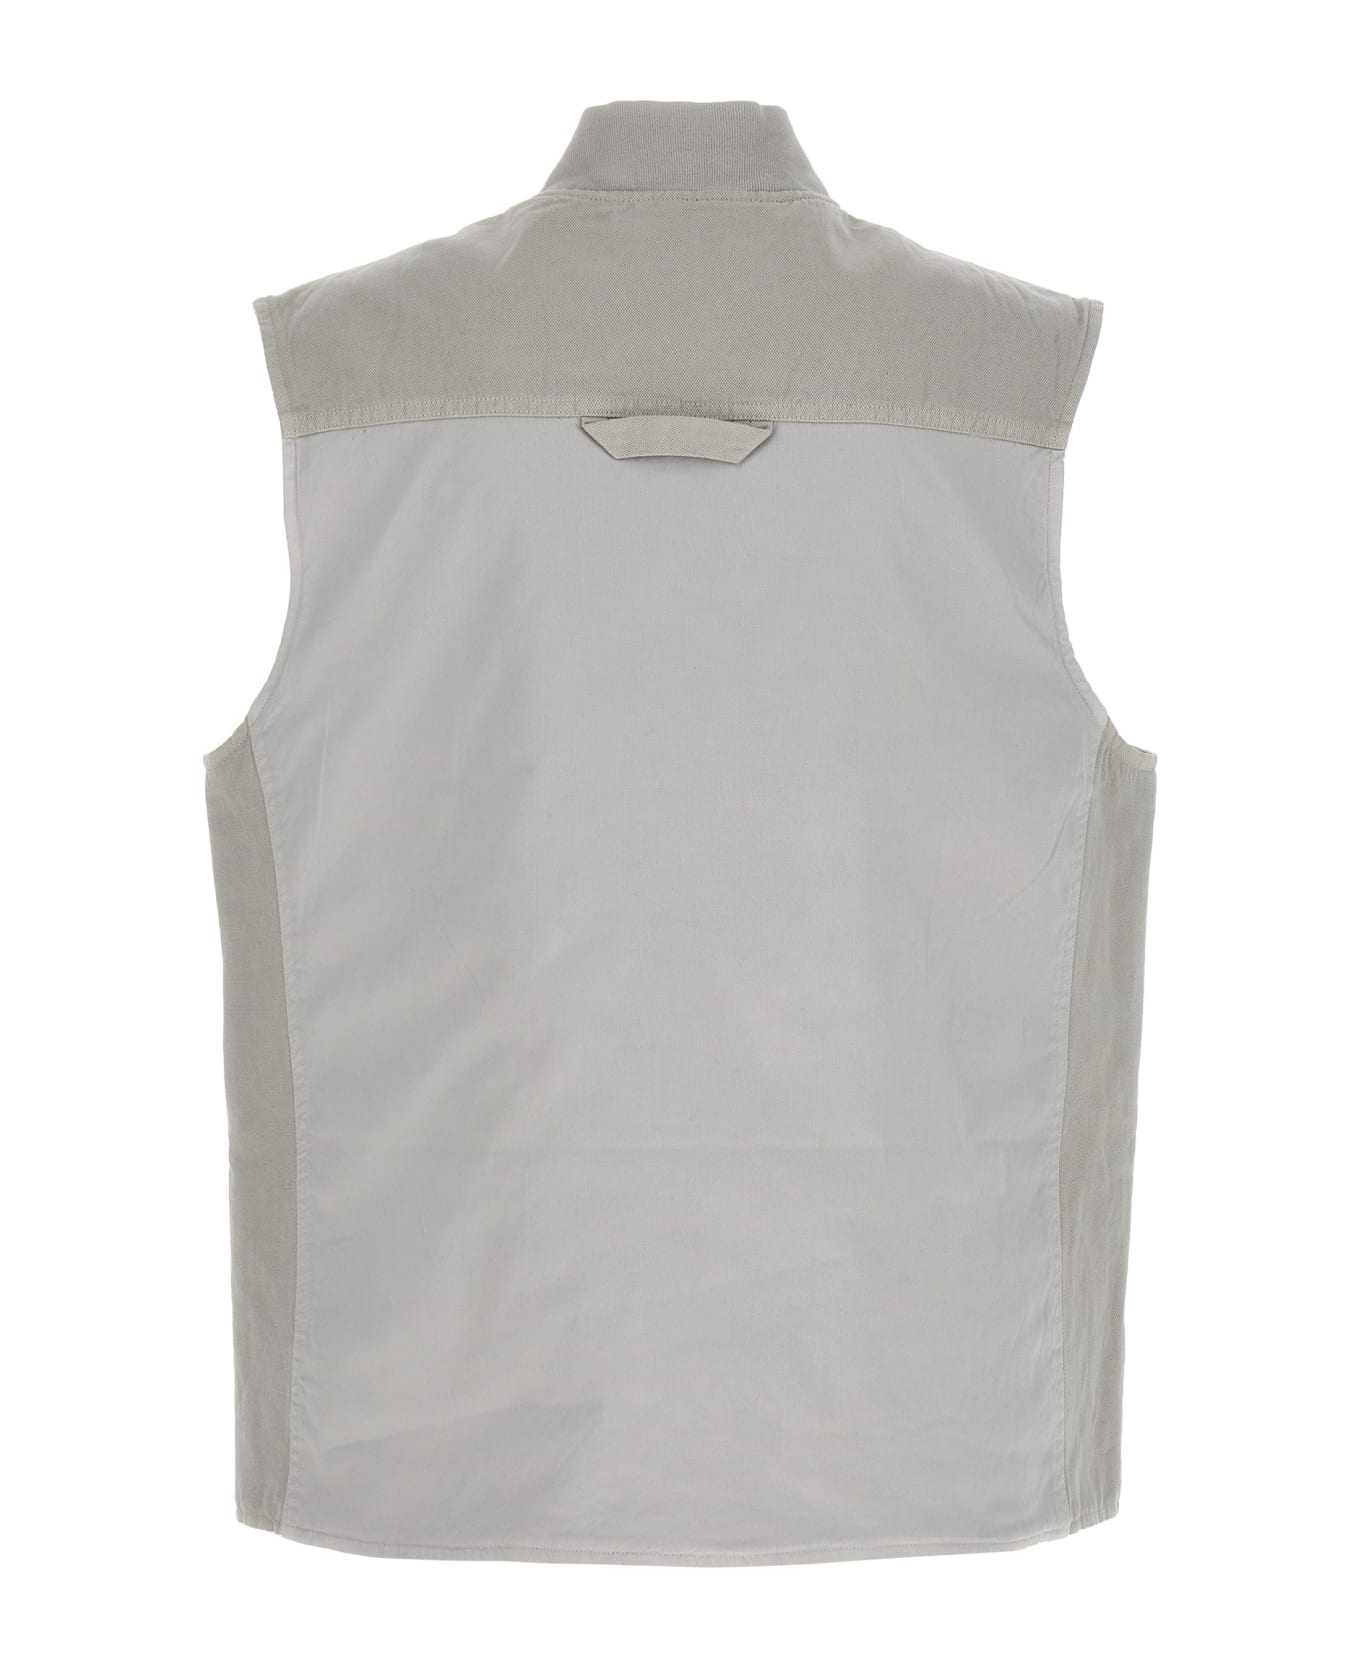 Objects Iv Life Canvas Vest - GREY